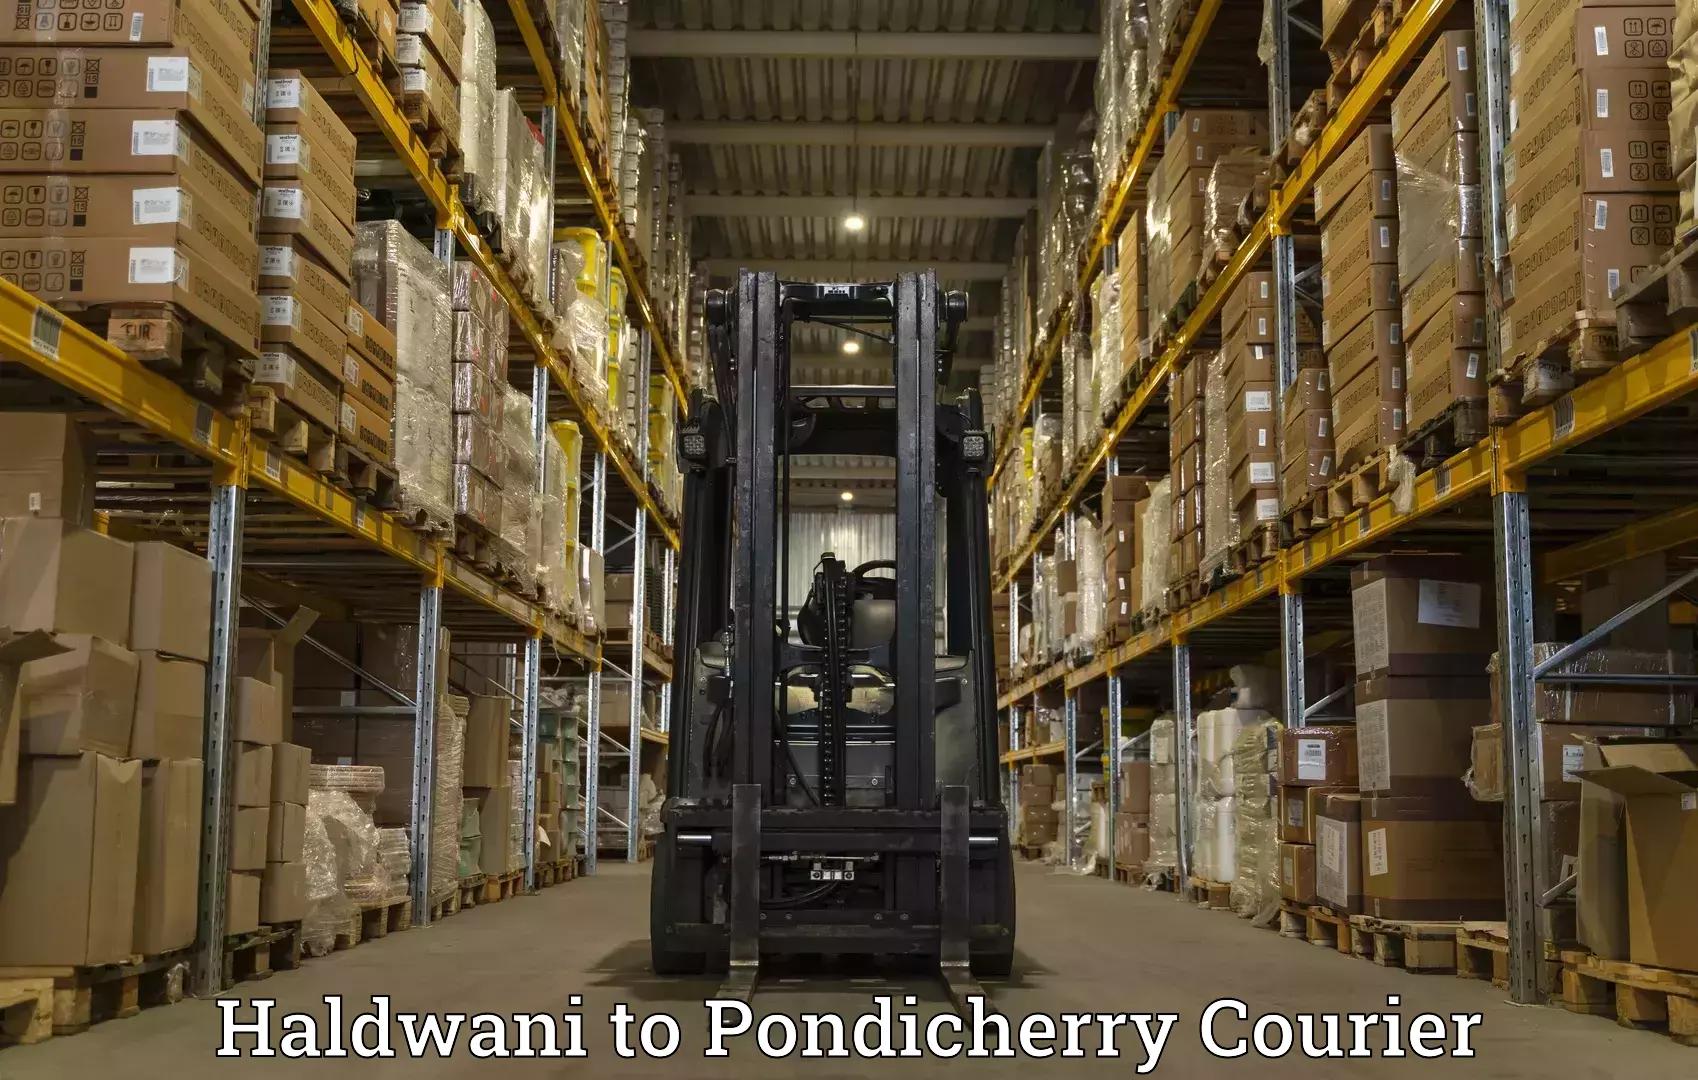 Package tracking in Haldwani to Pondicherry